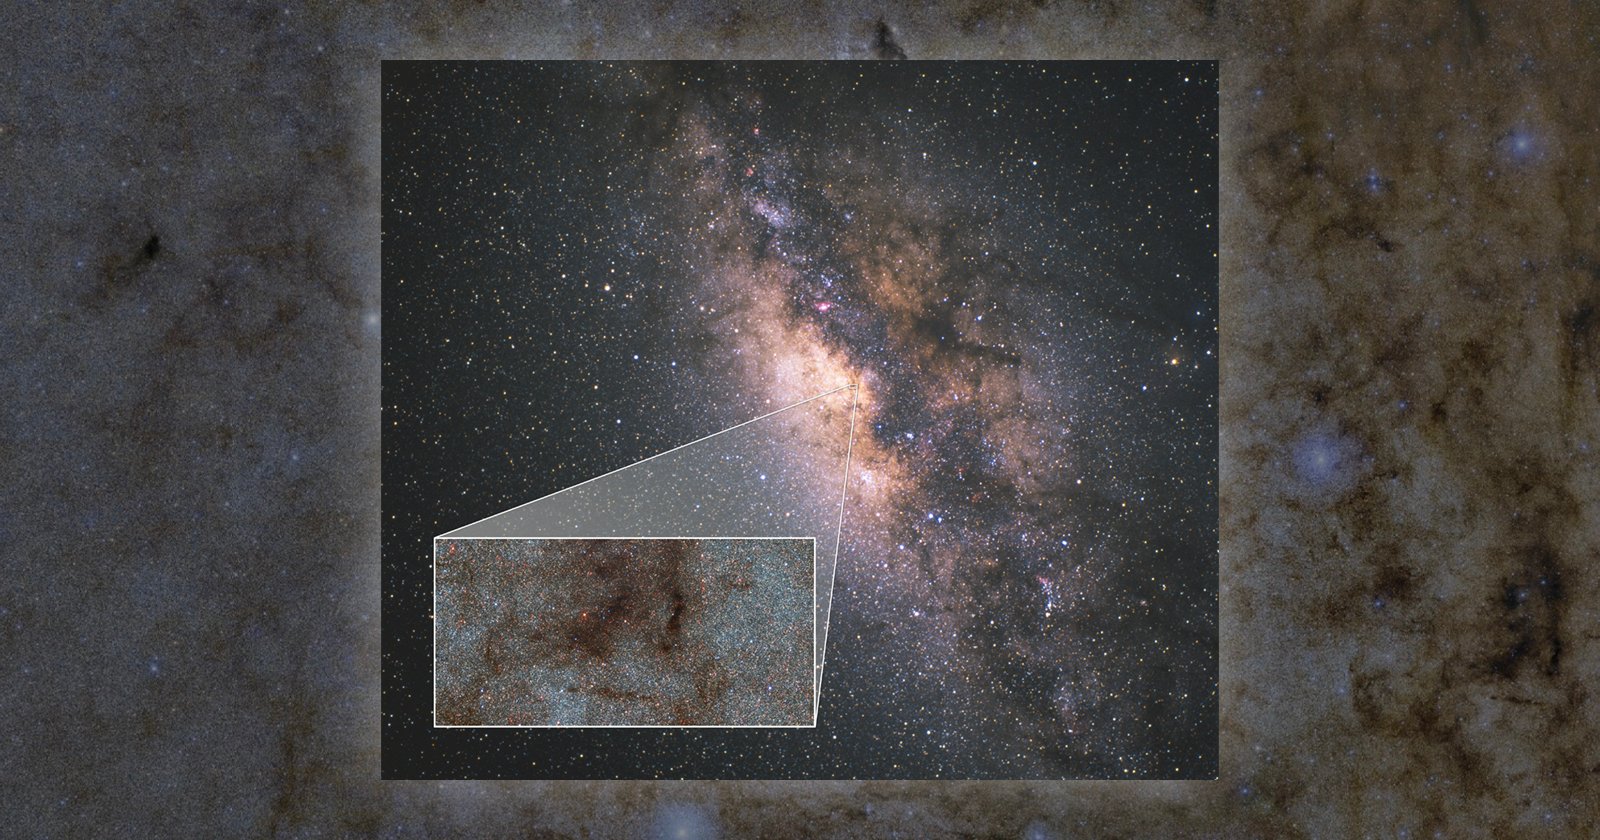 Scientists Photographed Our Galactic Bulge Using a Dark Energy Camera